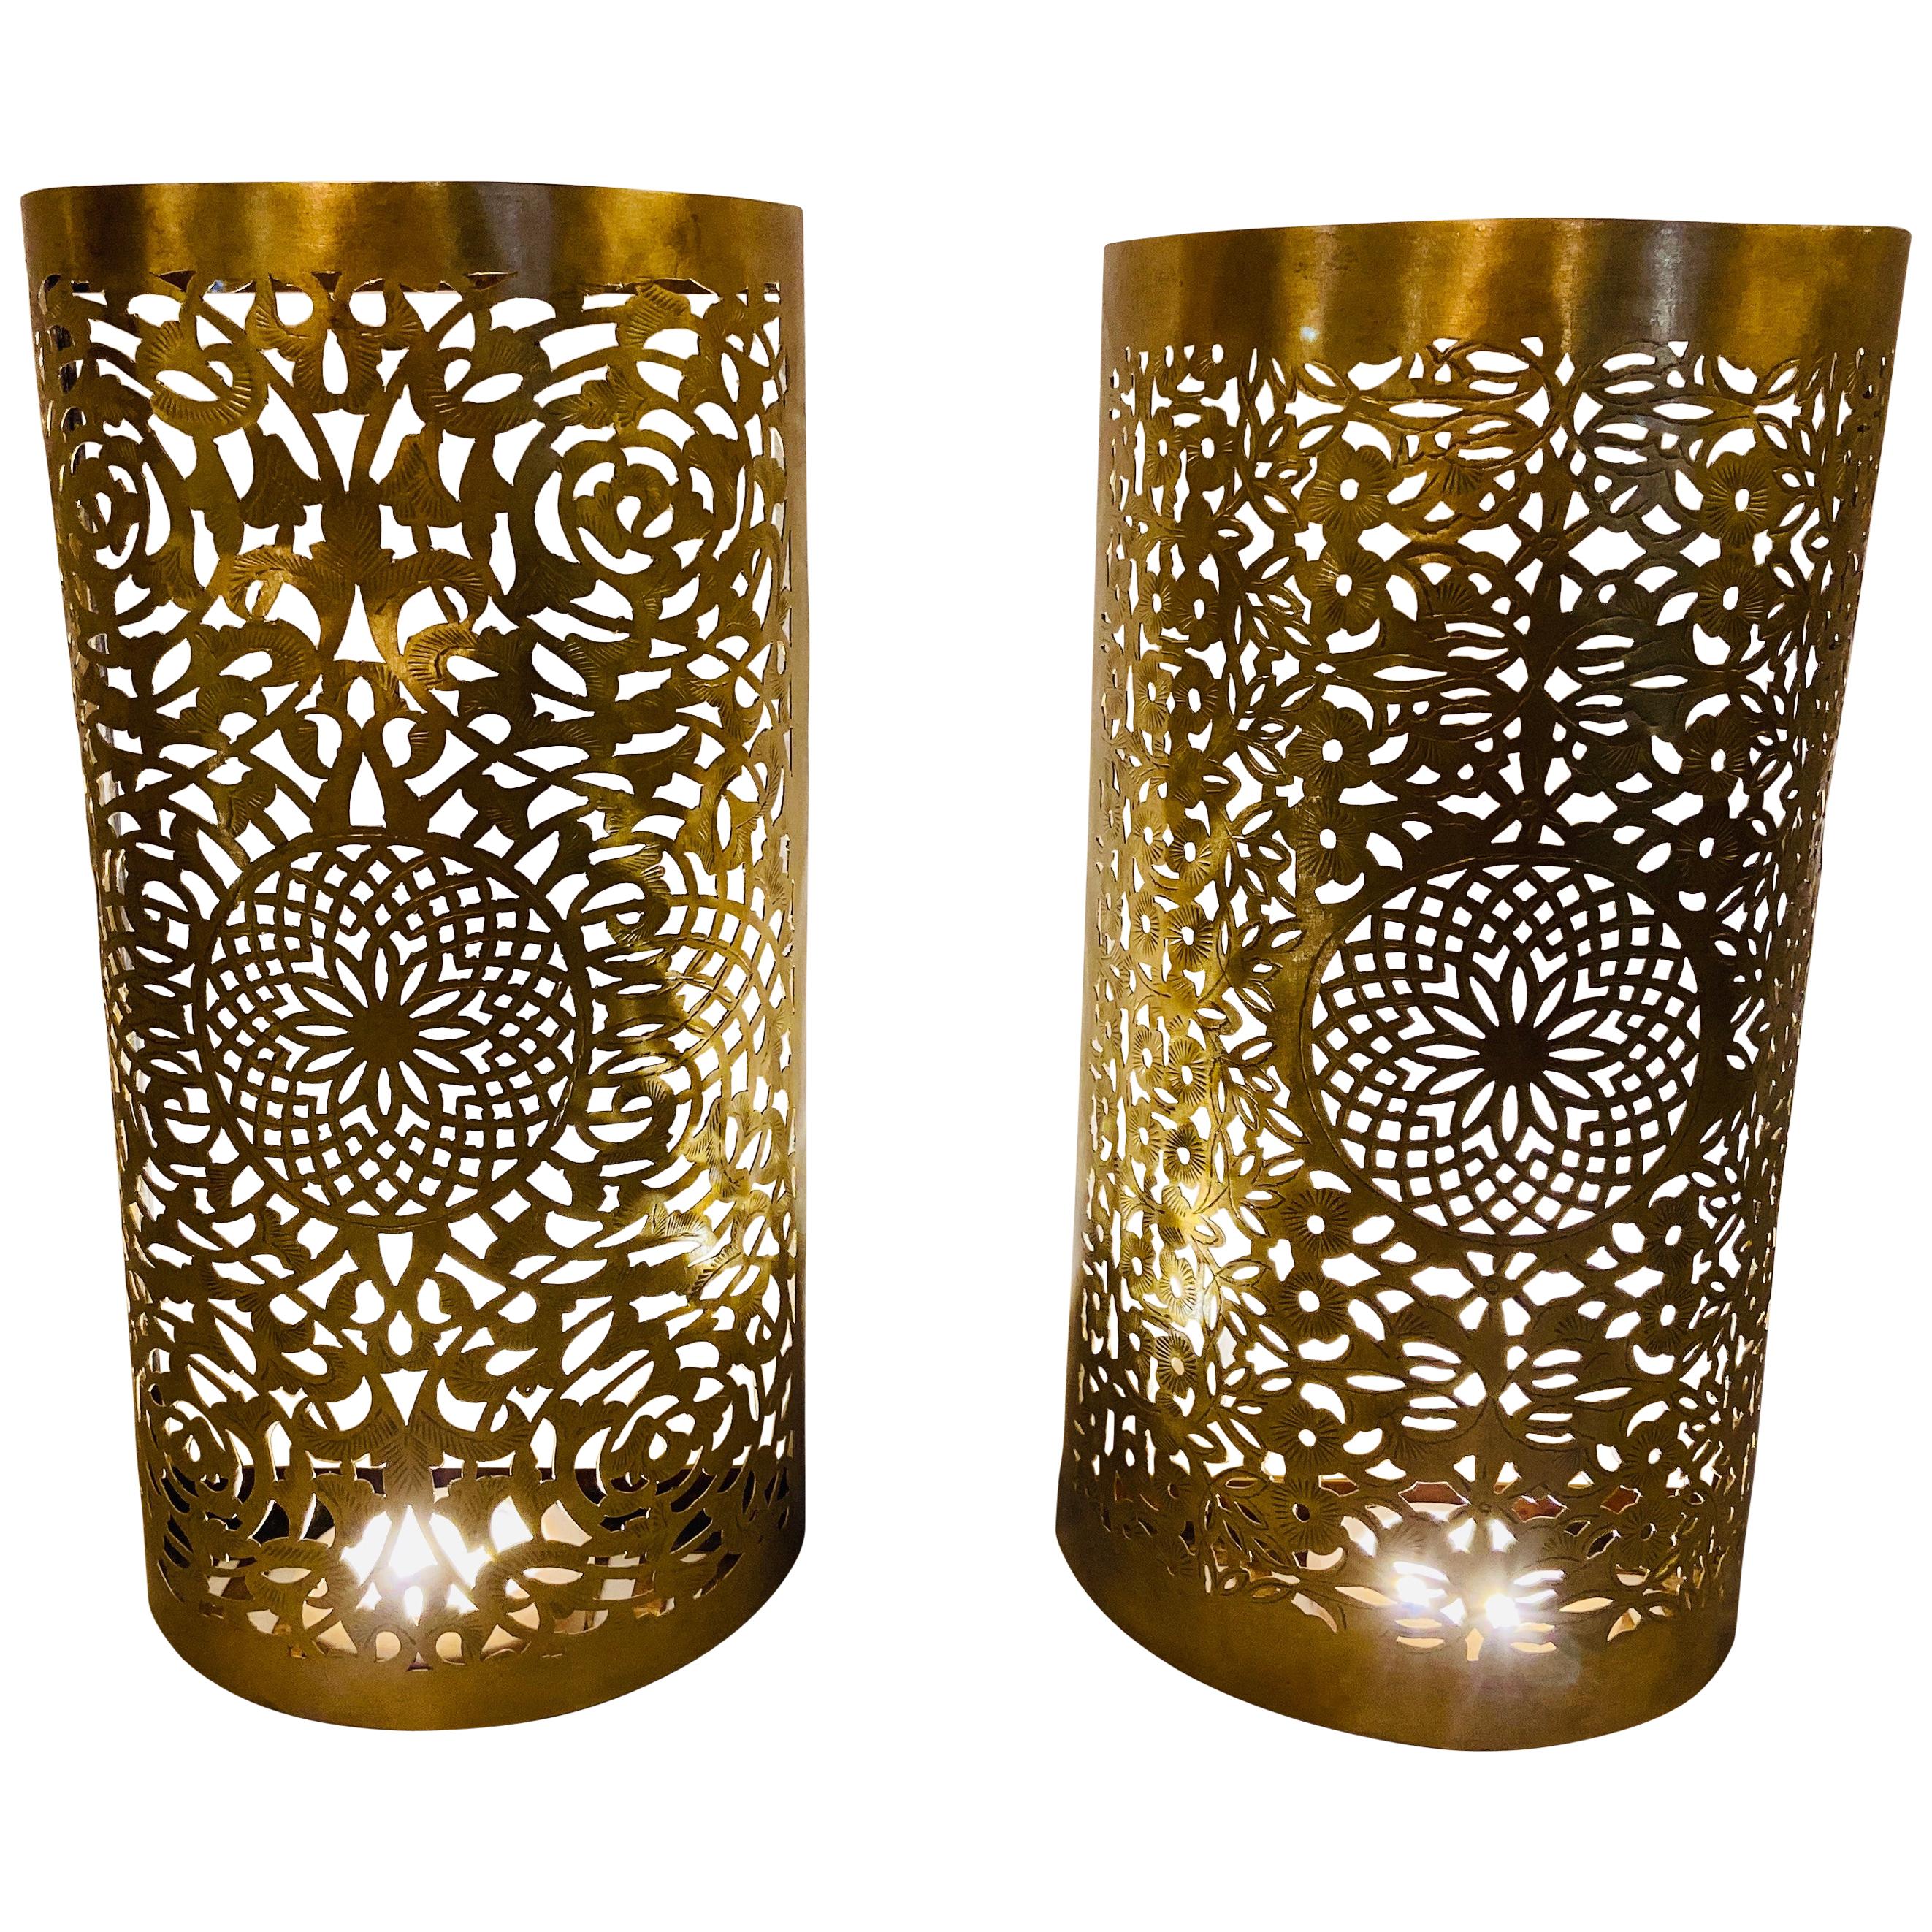 Moroccan Brass Wall Lantern or Sconce with Filigree Design, a Pair